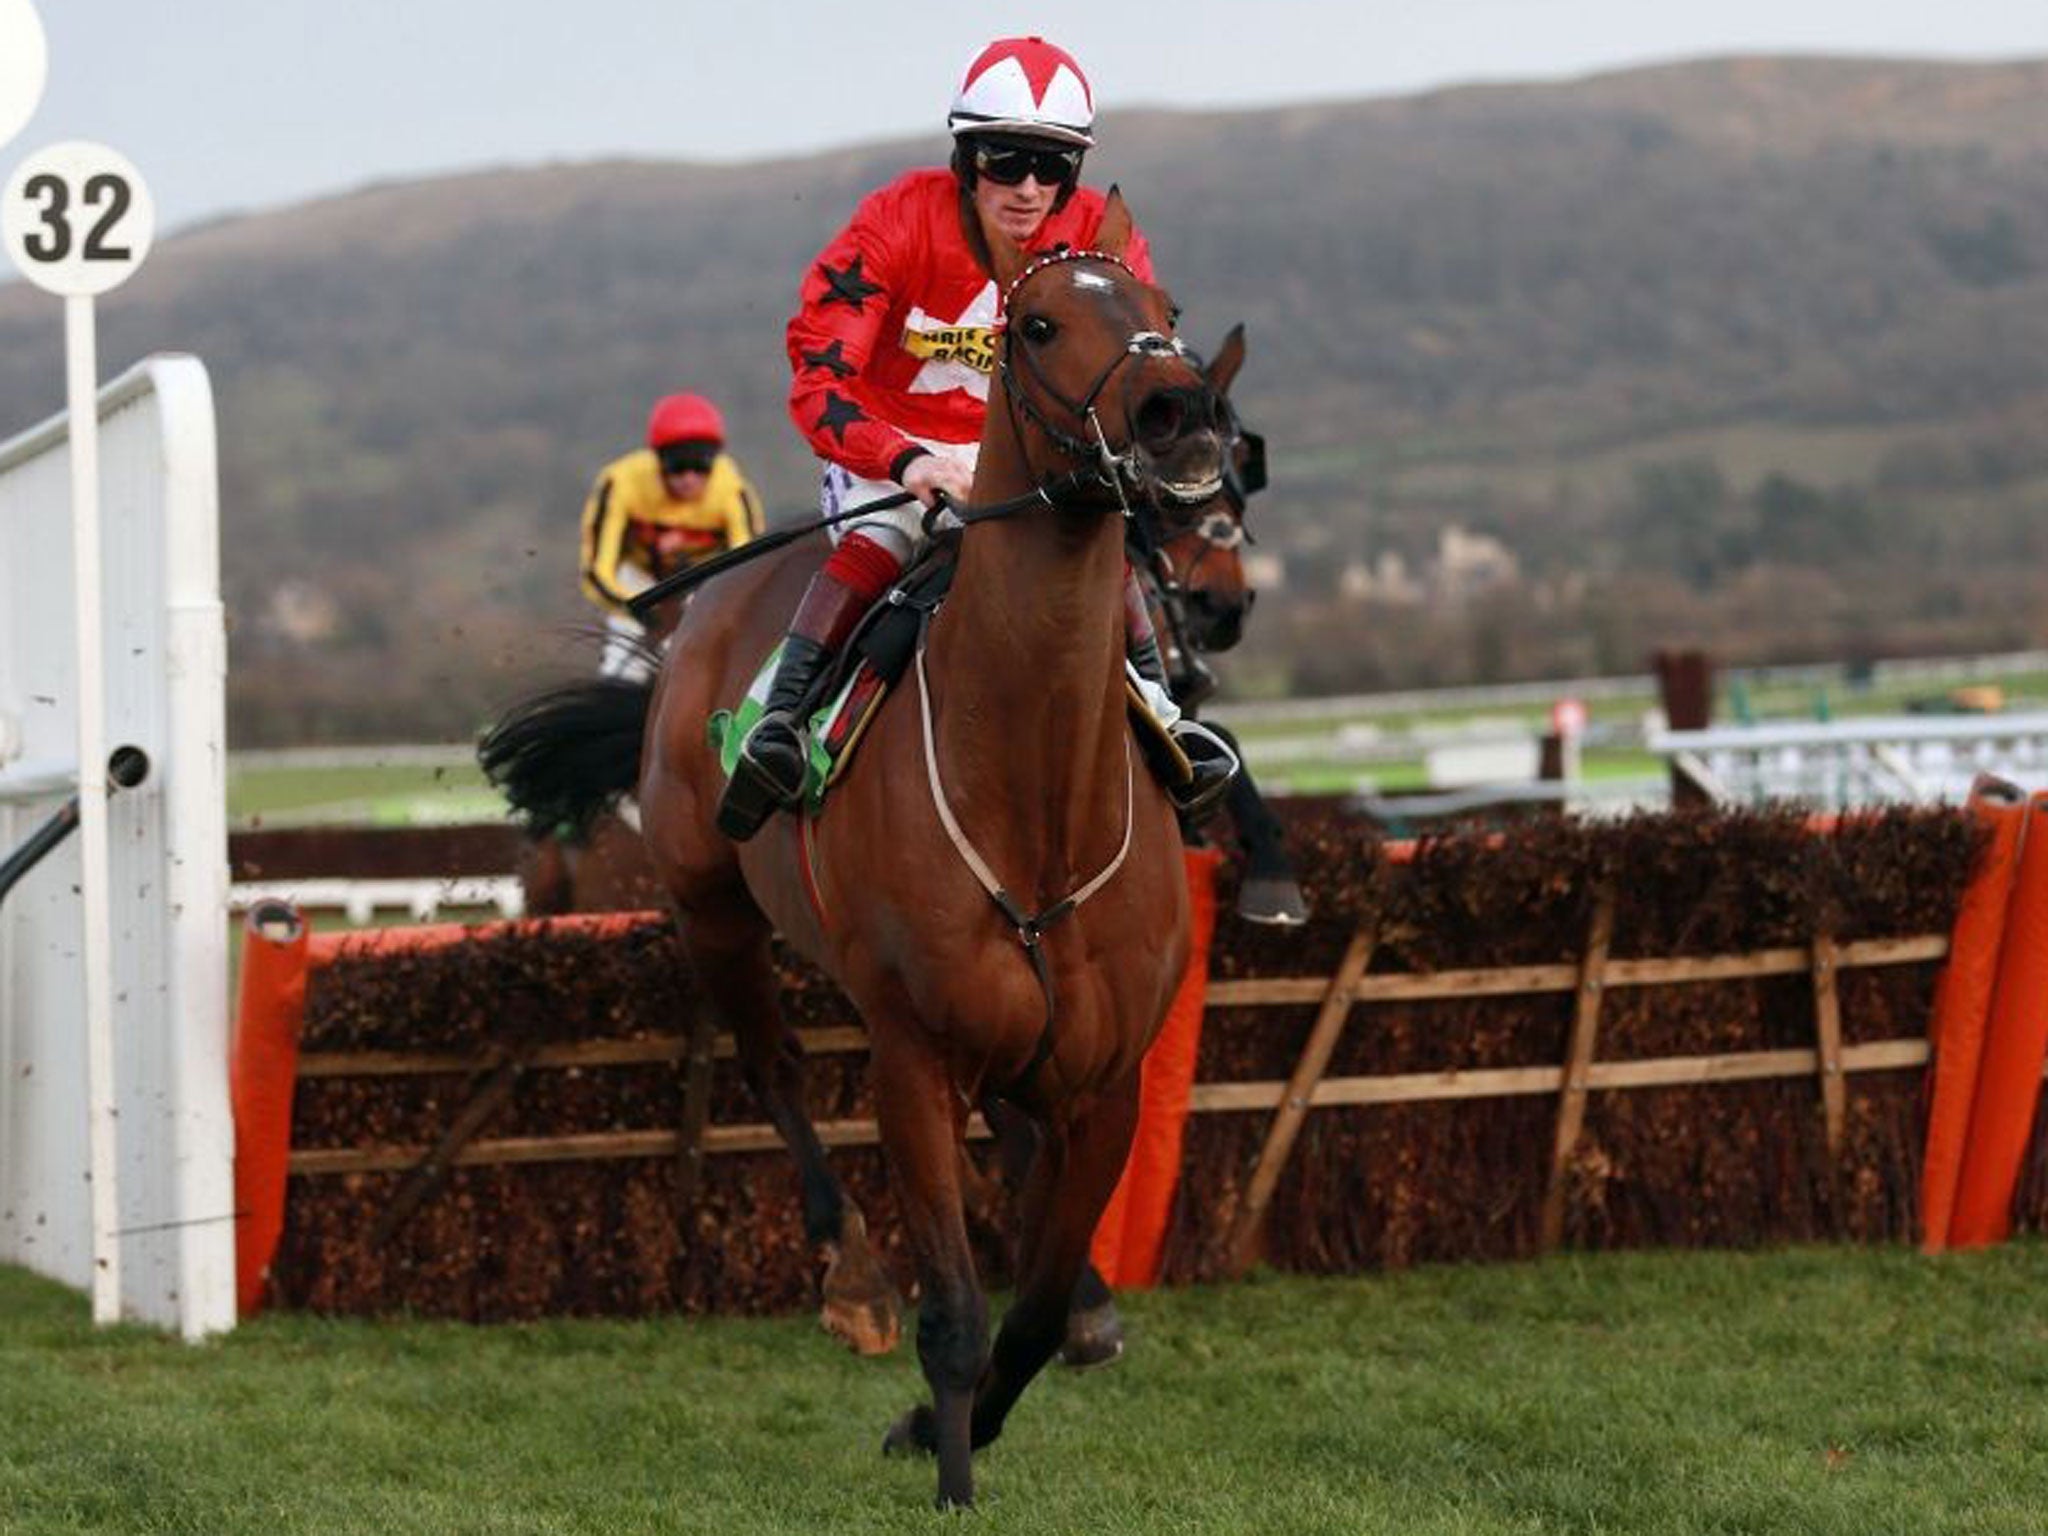 Proper Champion: The New One, ridden by Sam Twiston-Davies, heads for victory in the International Hurdle